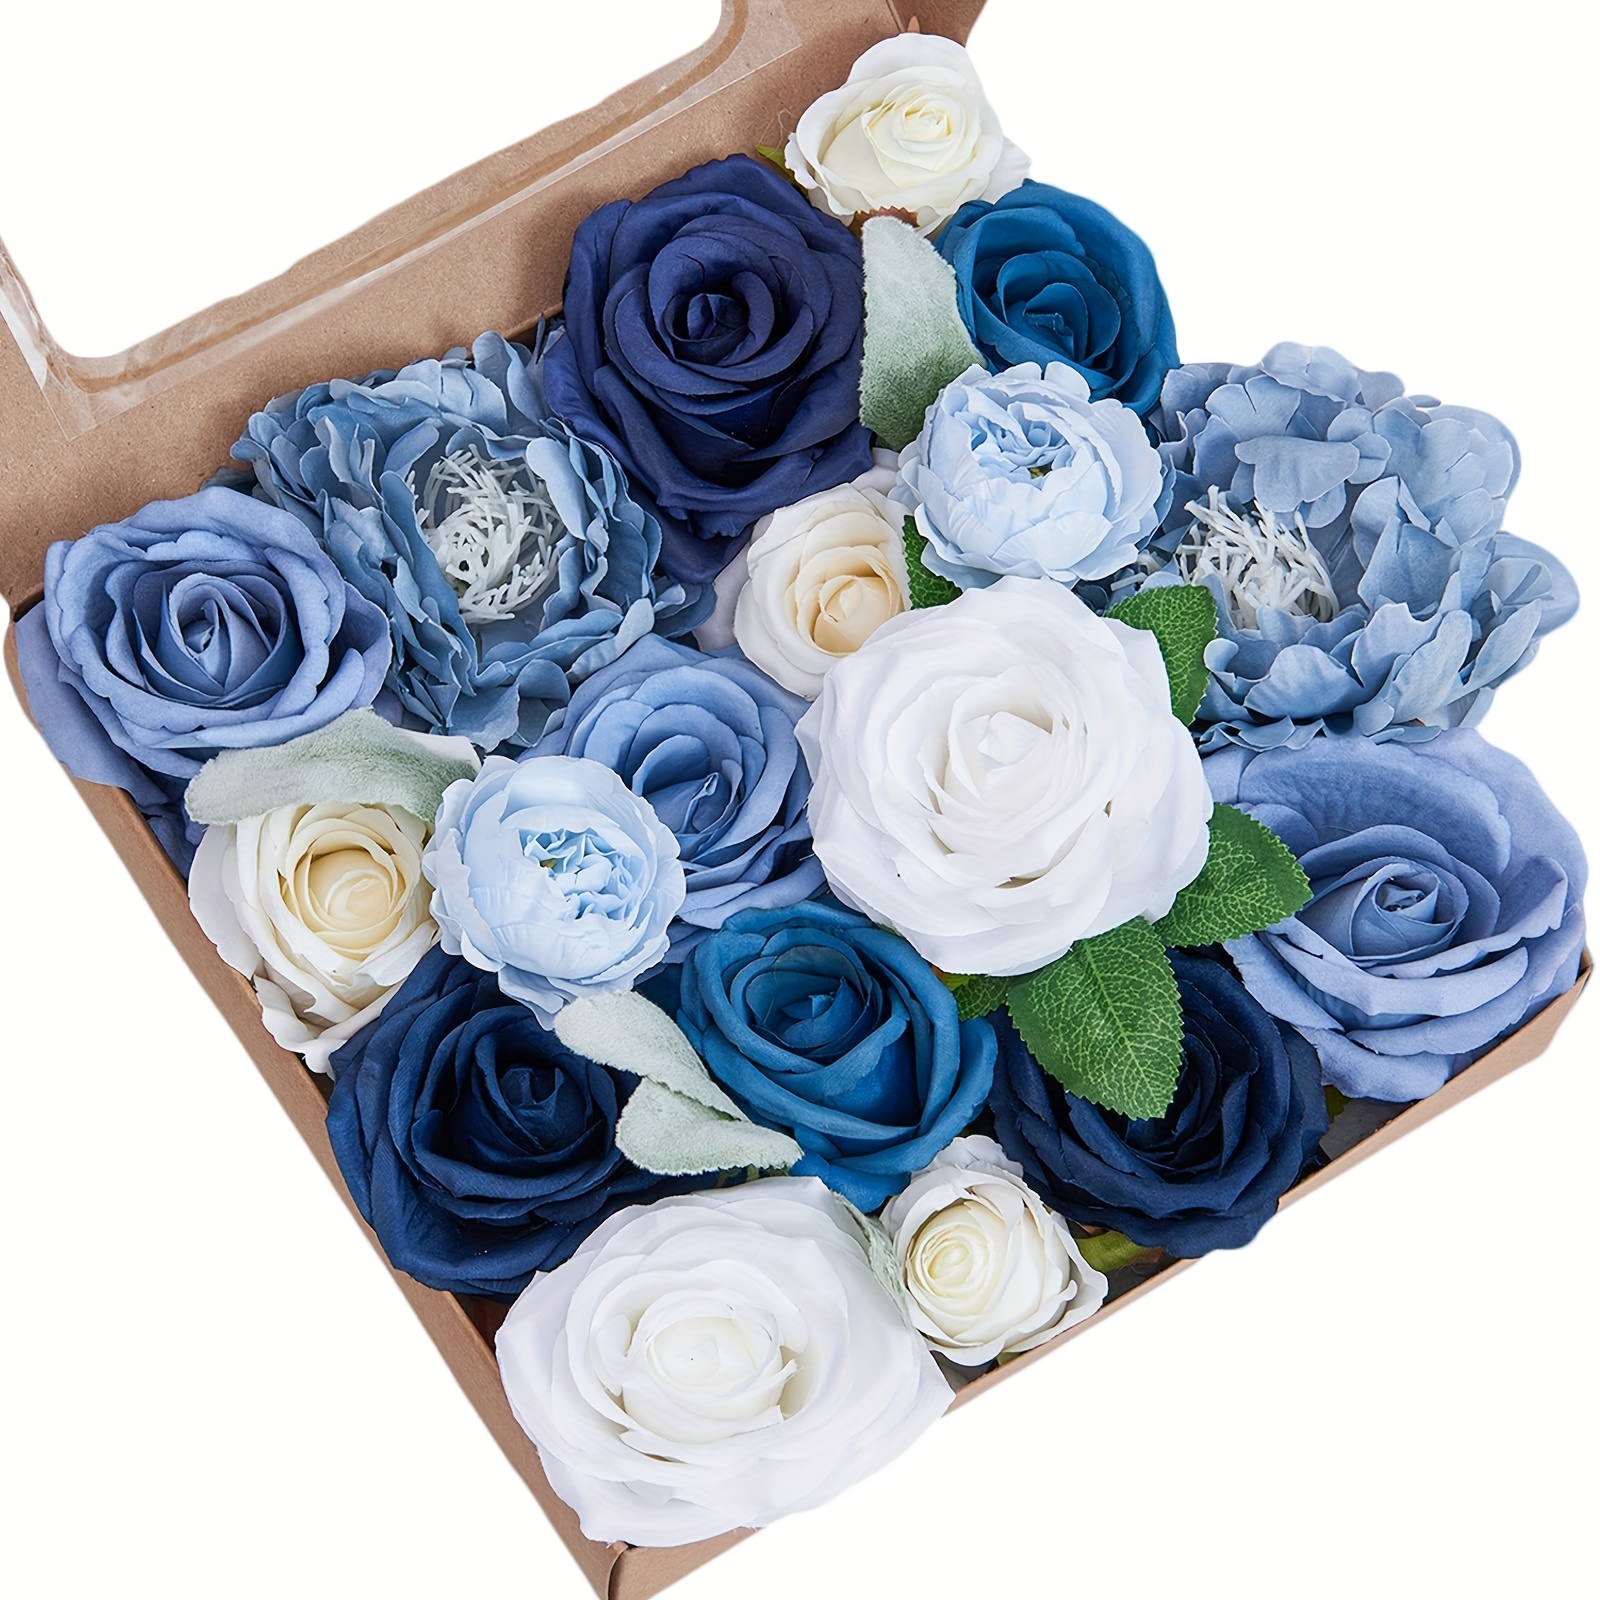 Artificial Flowers Combo Box Set DIY Bouquet Centerpiece Faux Flowers Bulk  Handmade Silk Flowers with Leaves Stems for Wedding Bridal Baby Shower Cake